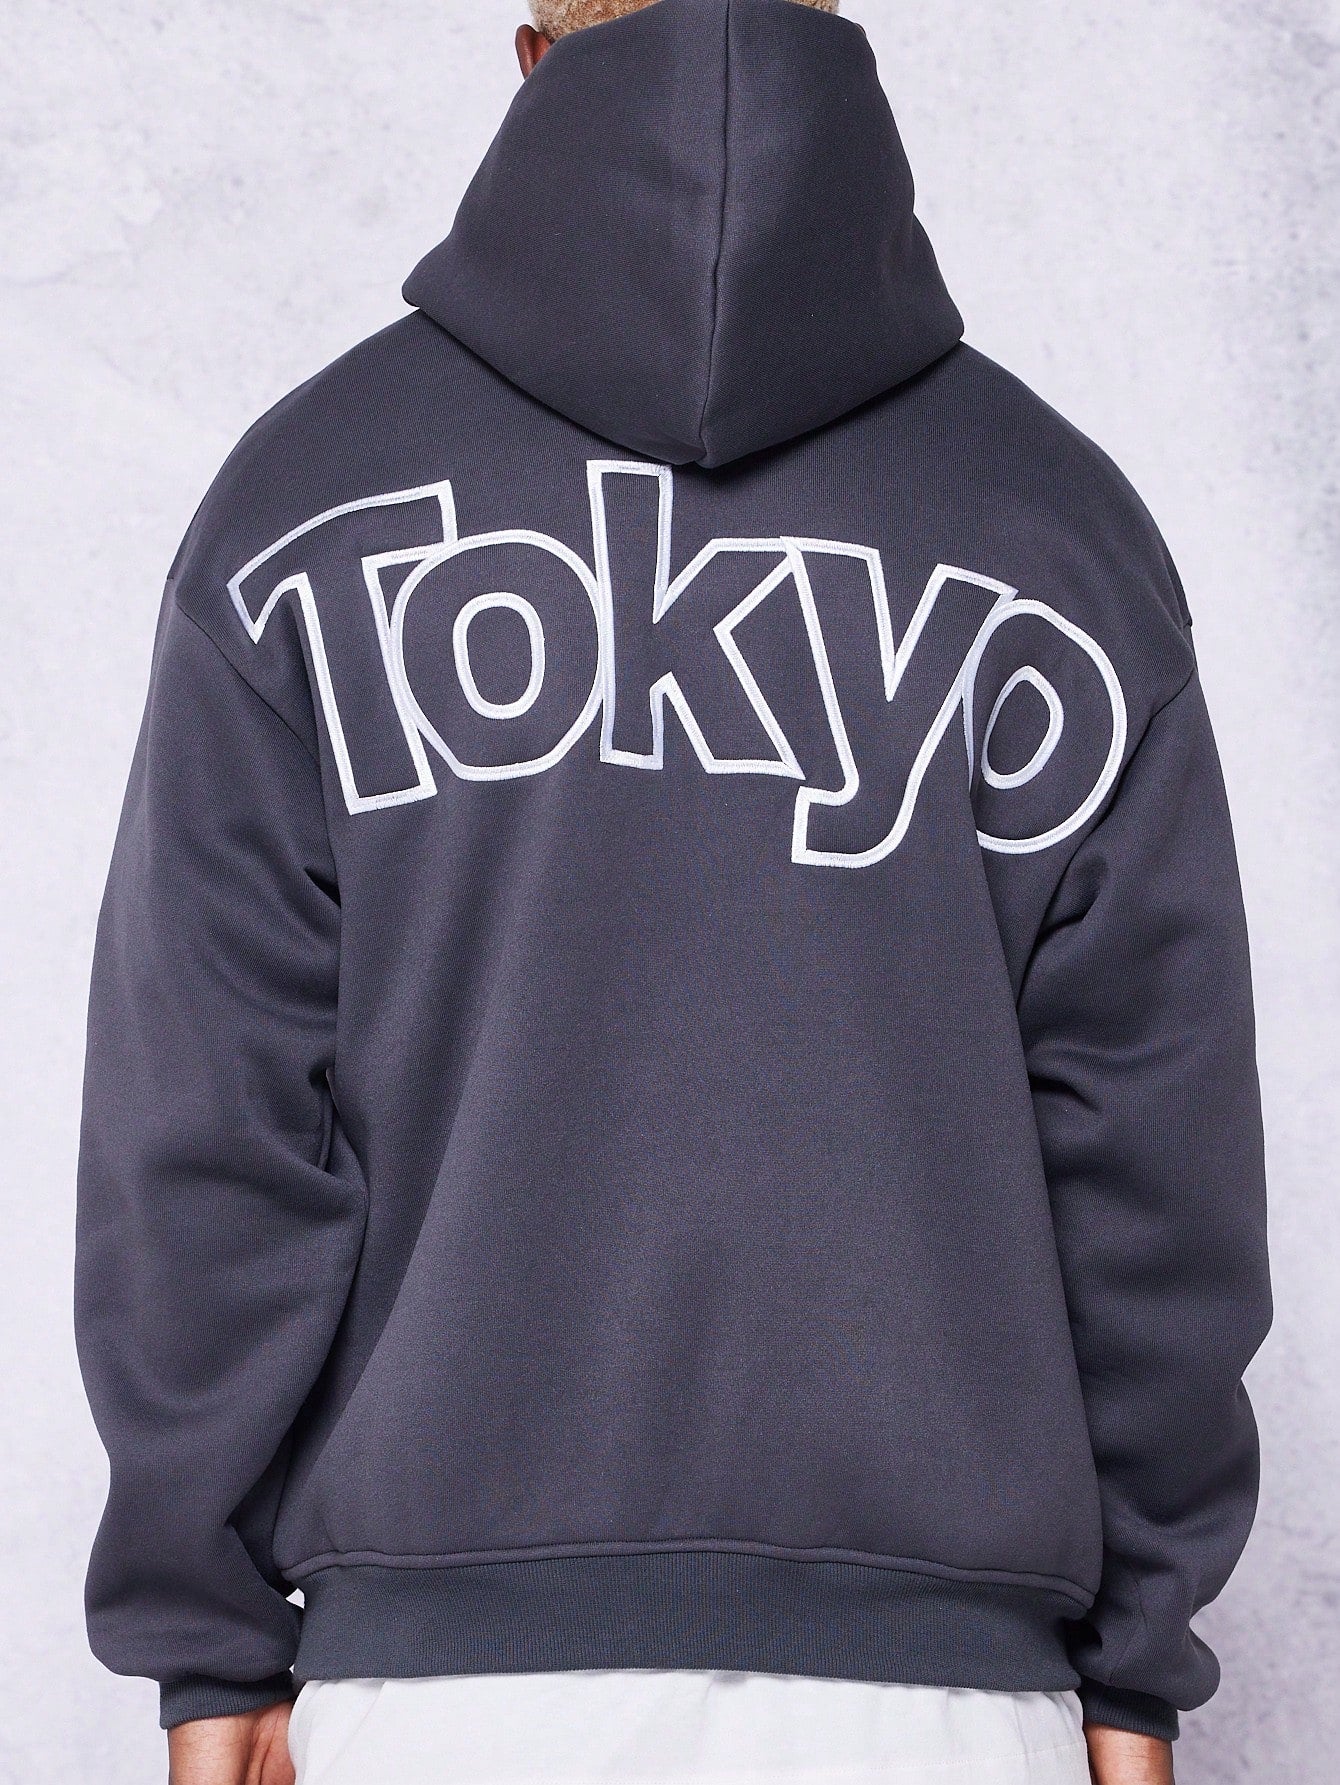 Overhead Hoodie With Tokyo Embroidery